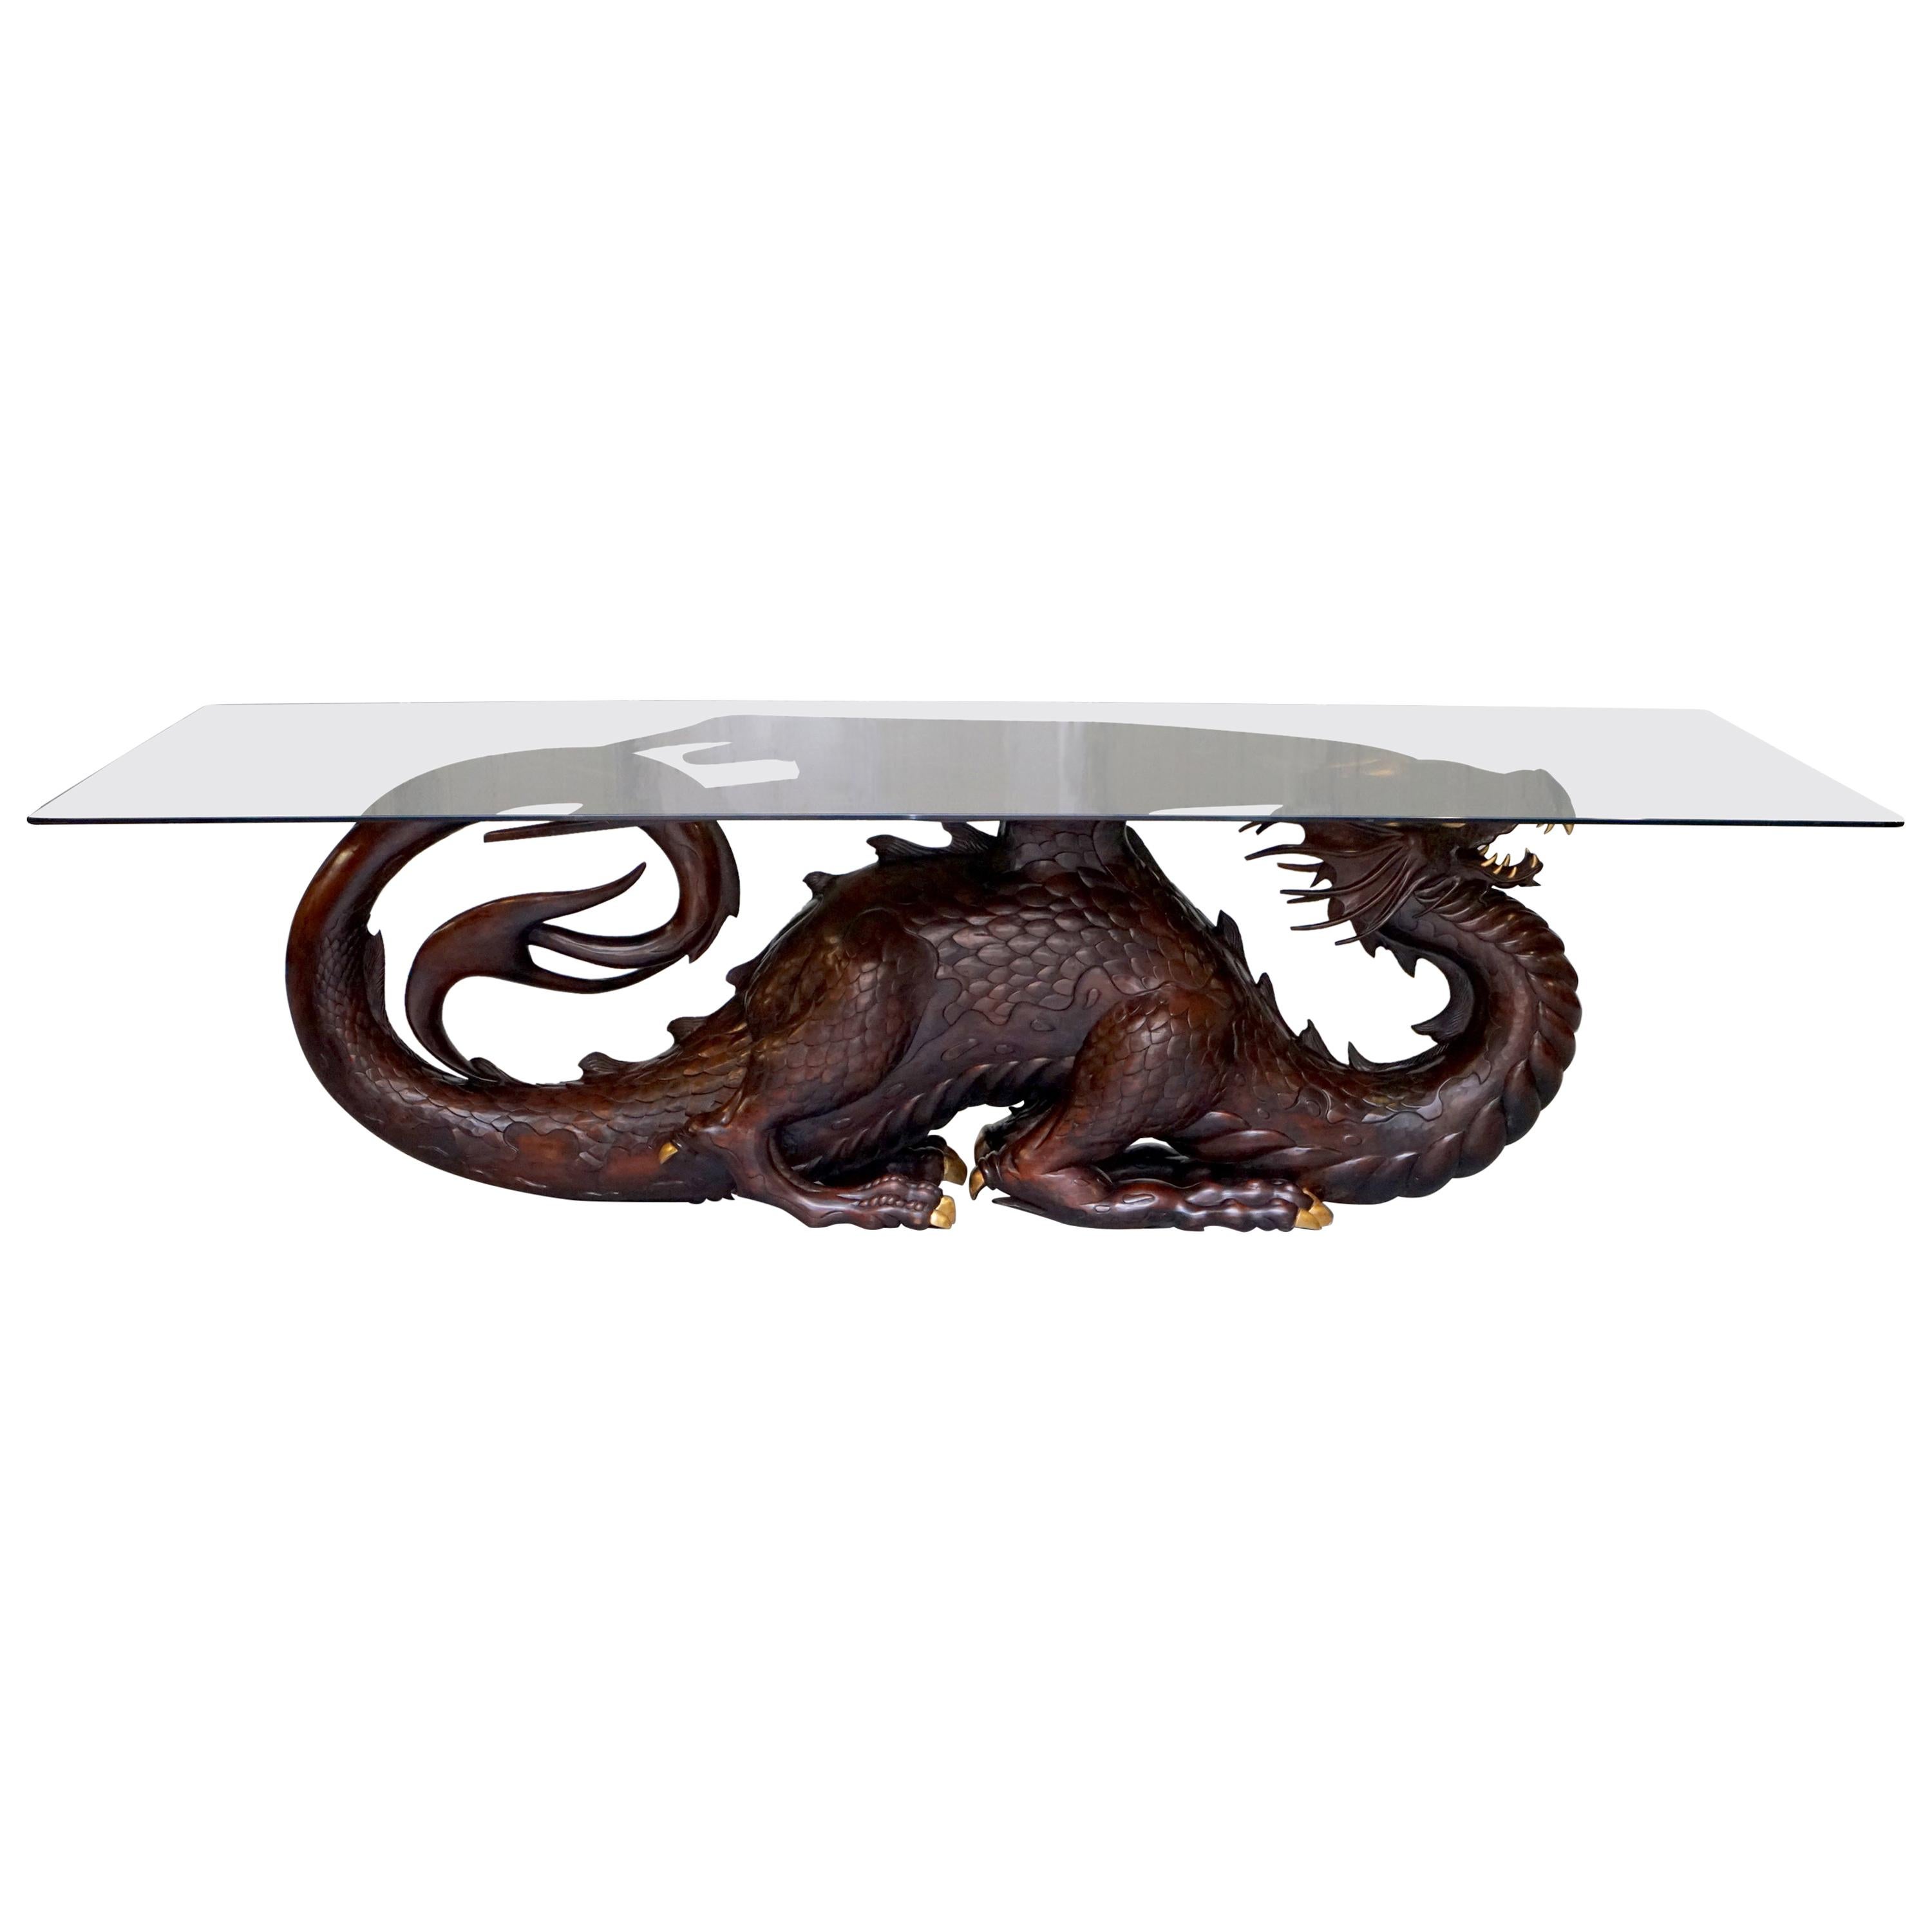 Hardwood Neil Busby Dragon 12 Person Dining Table Ruby Eyes 22-Carat Gold